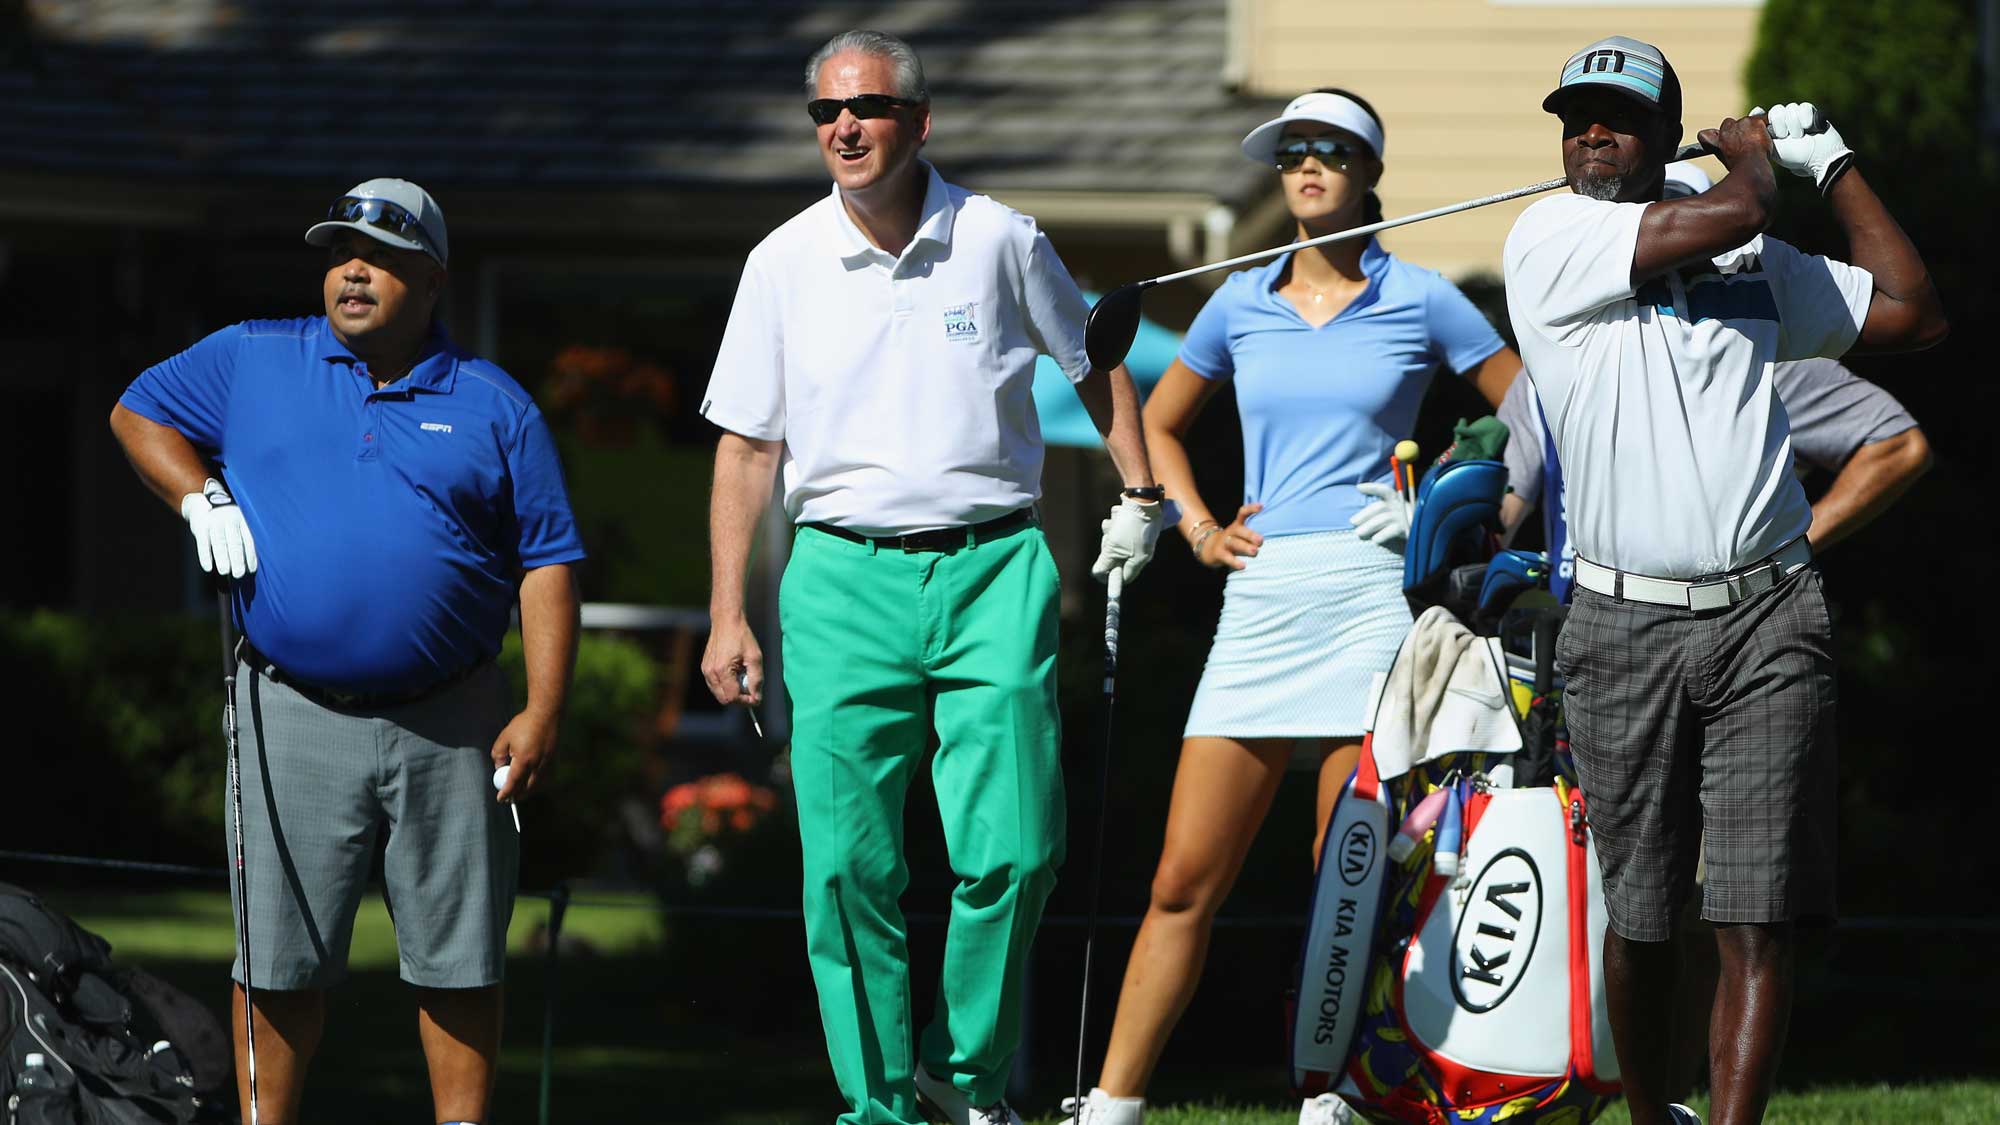 Actor Don Cheadle hits a shot as Scott Ozanus of KPMG, Michelle Wie and Michael Collins of ESPN look on during the pro-am prior to the start of the KPMG Women's PGA Championship